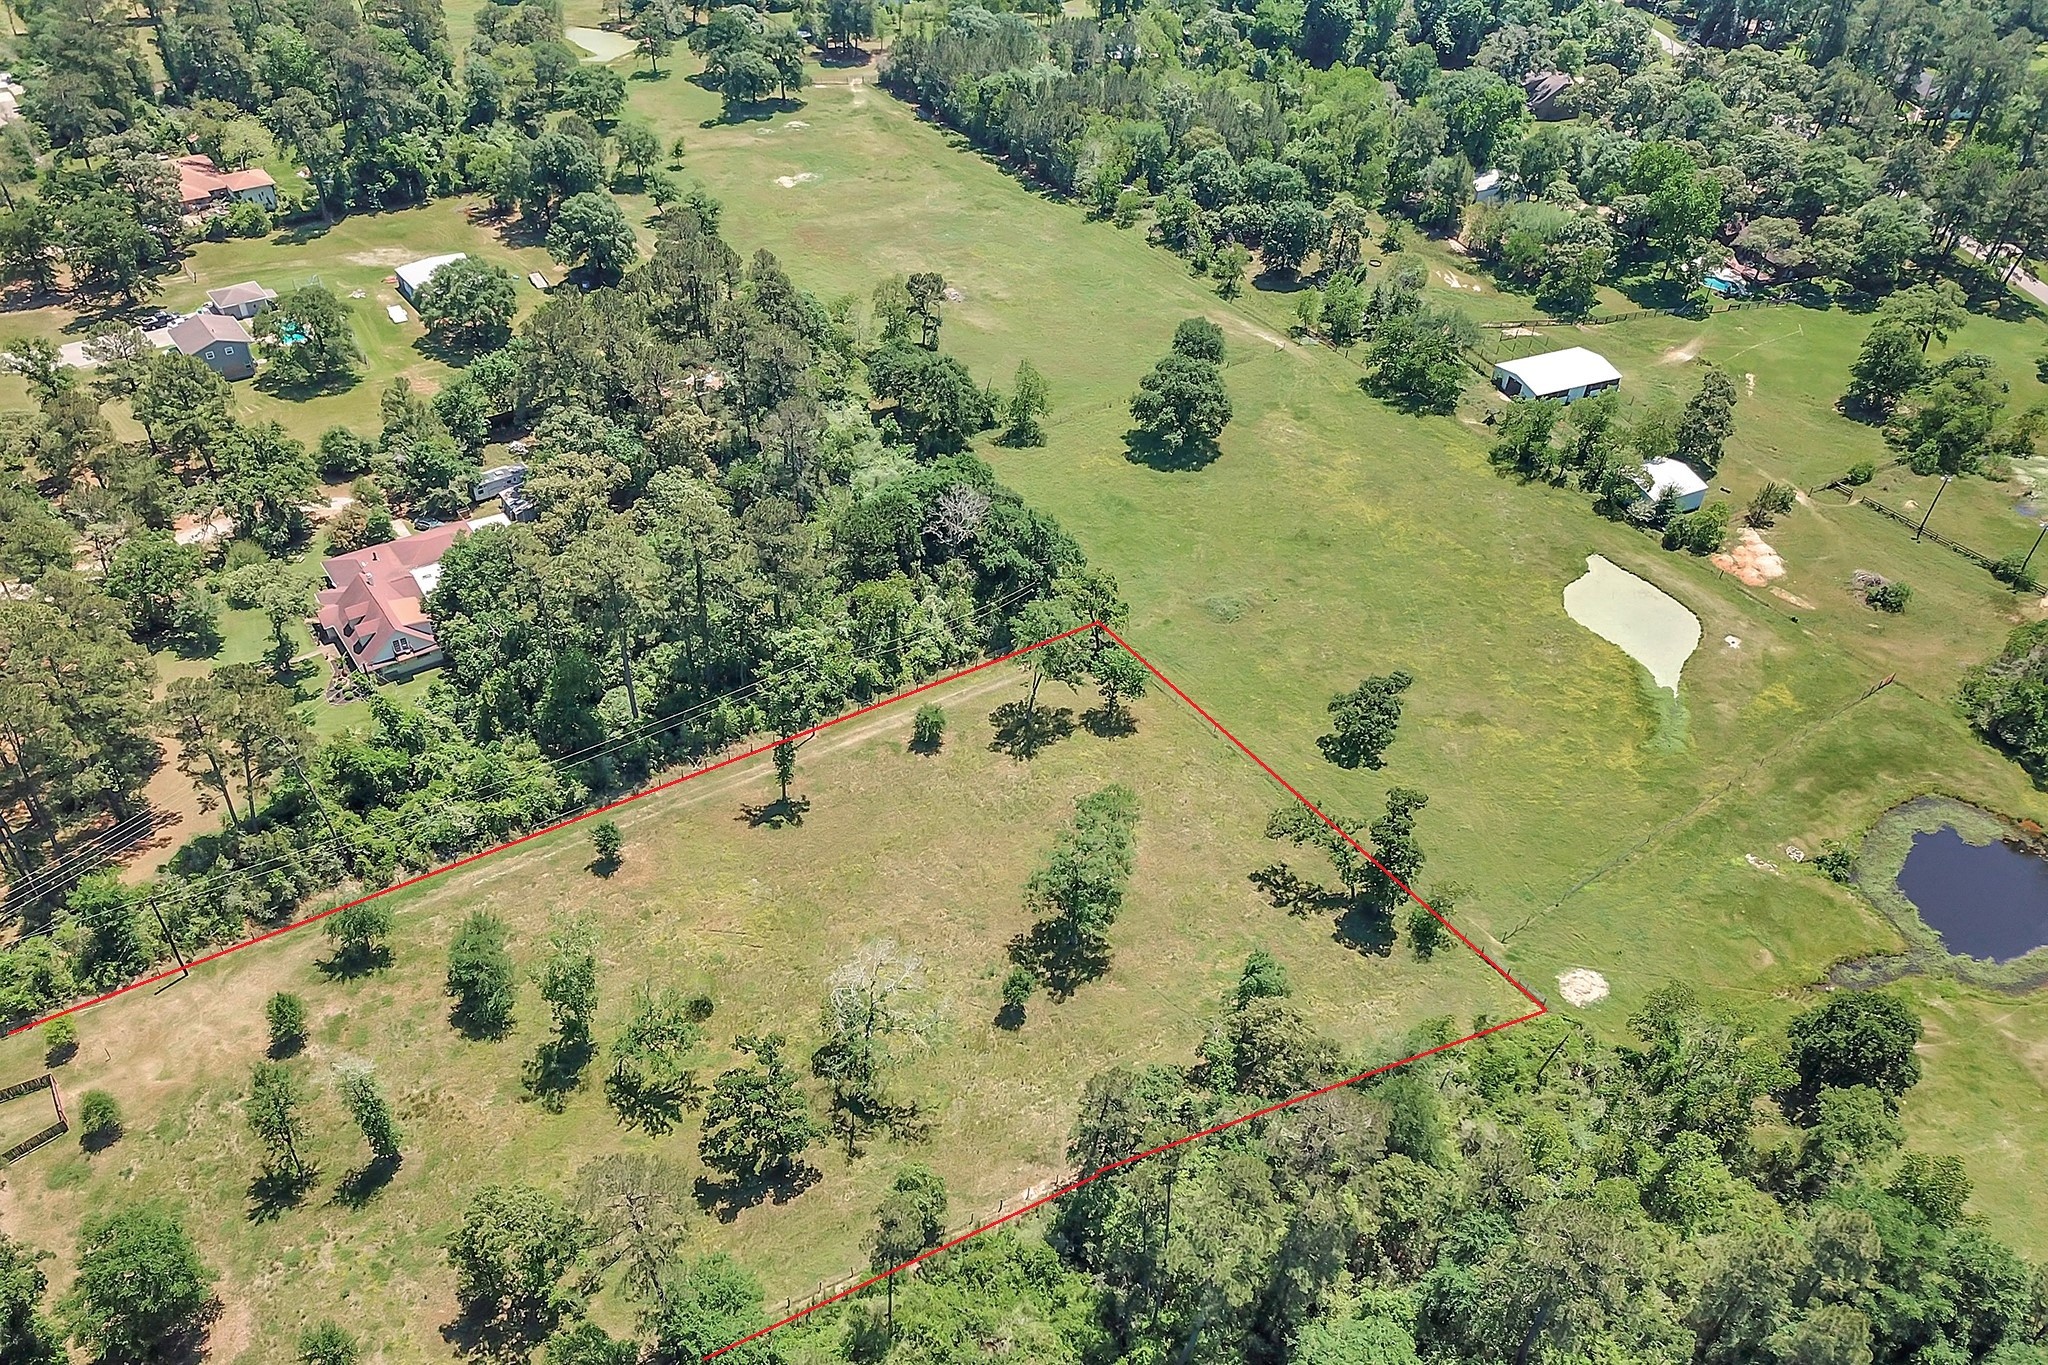 Overview of additional acreage for a total purchase of up to 11 acres.